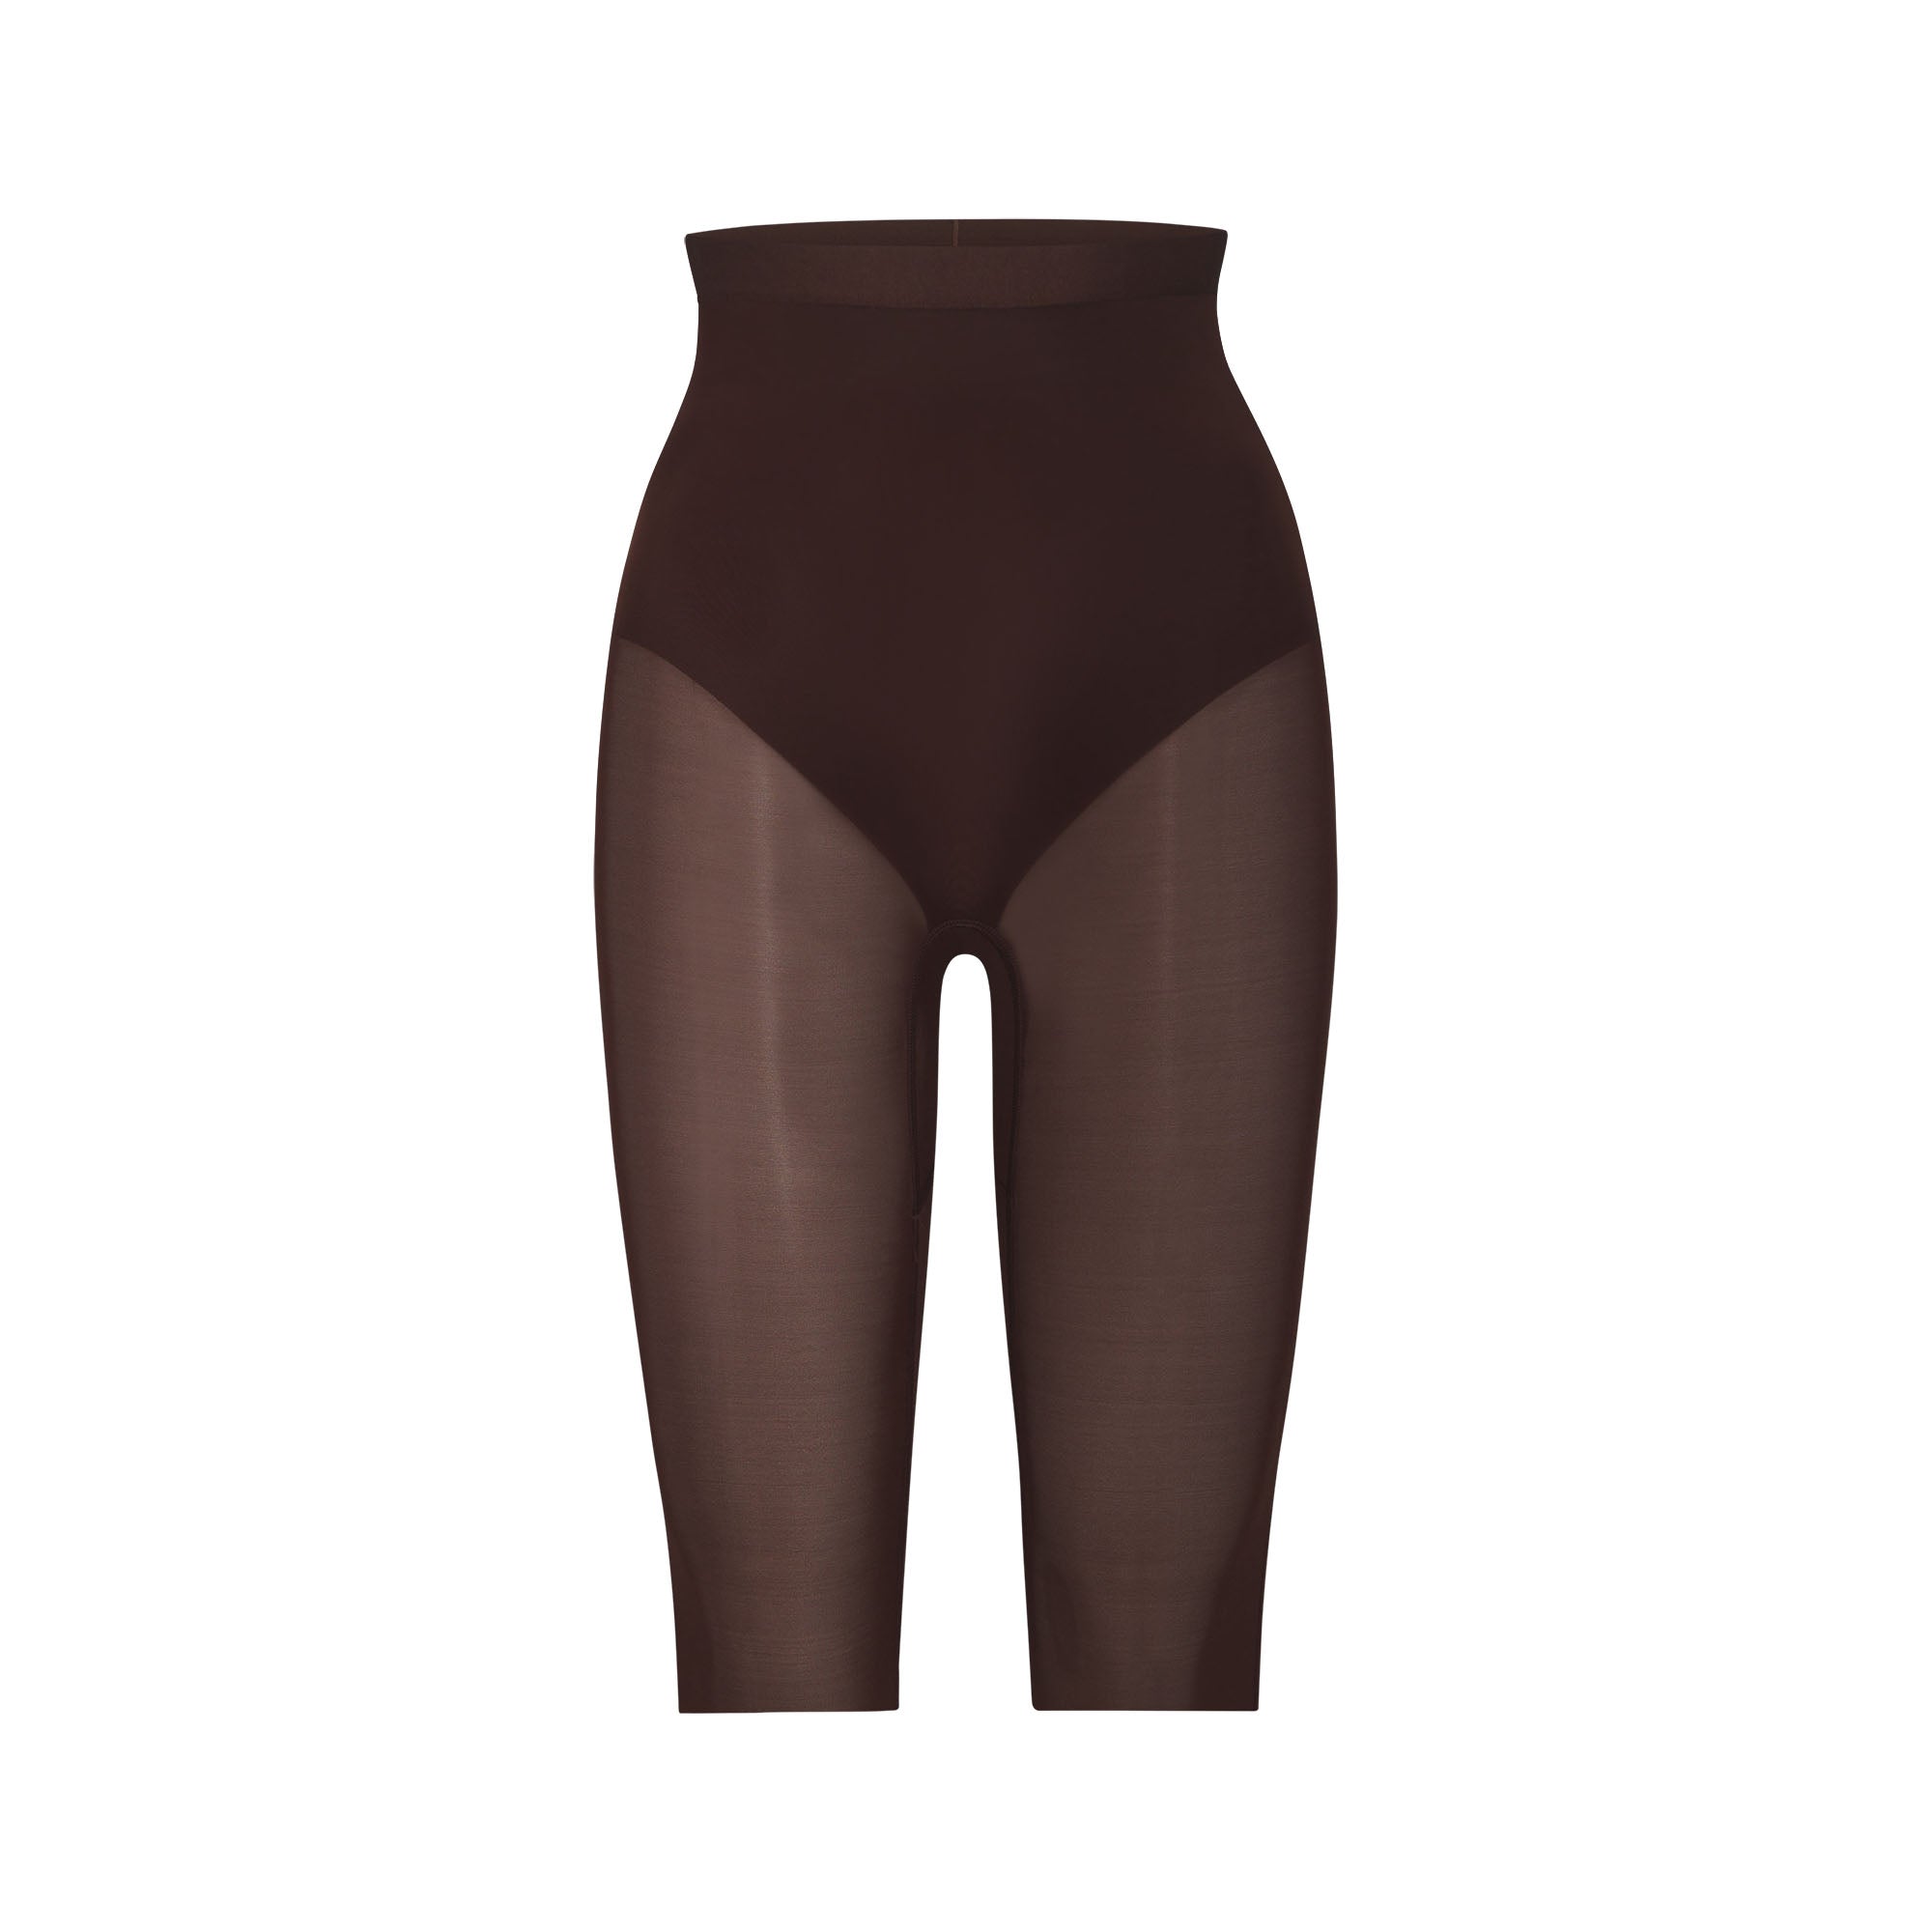 BARELY THERE CROPPED LEGGING | COCOA - BARELY THERE CROPPED LEGGING | COCOA